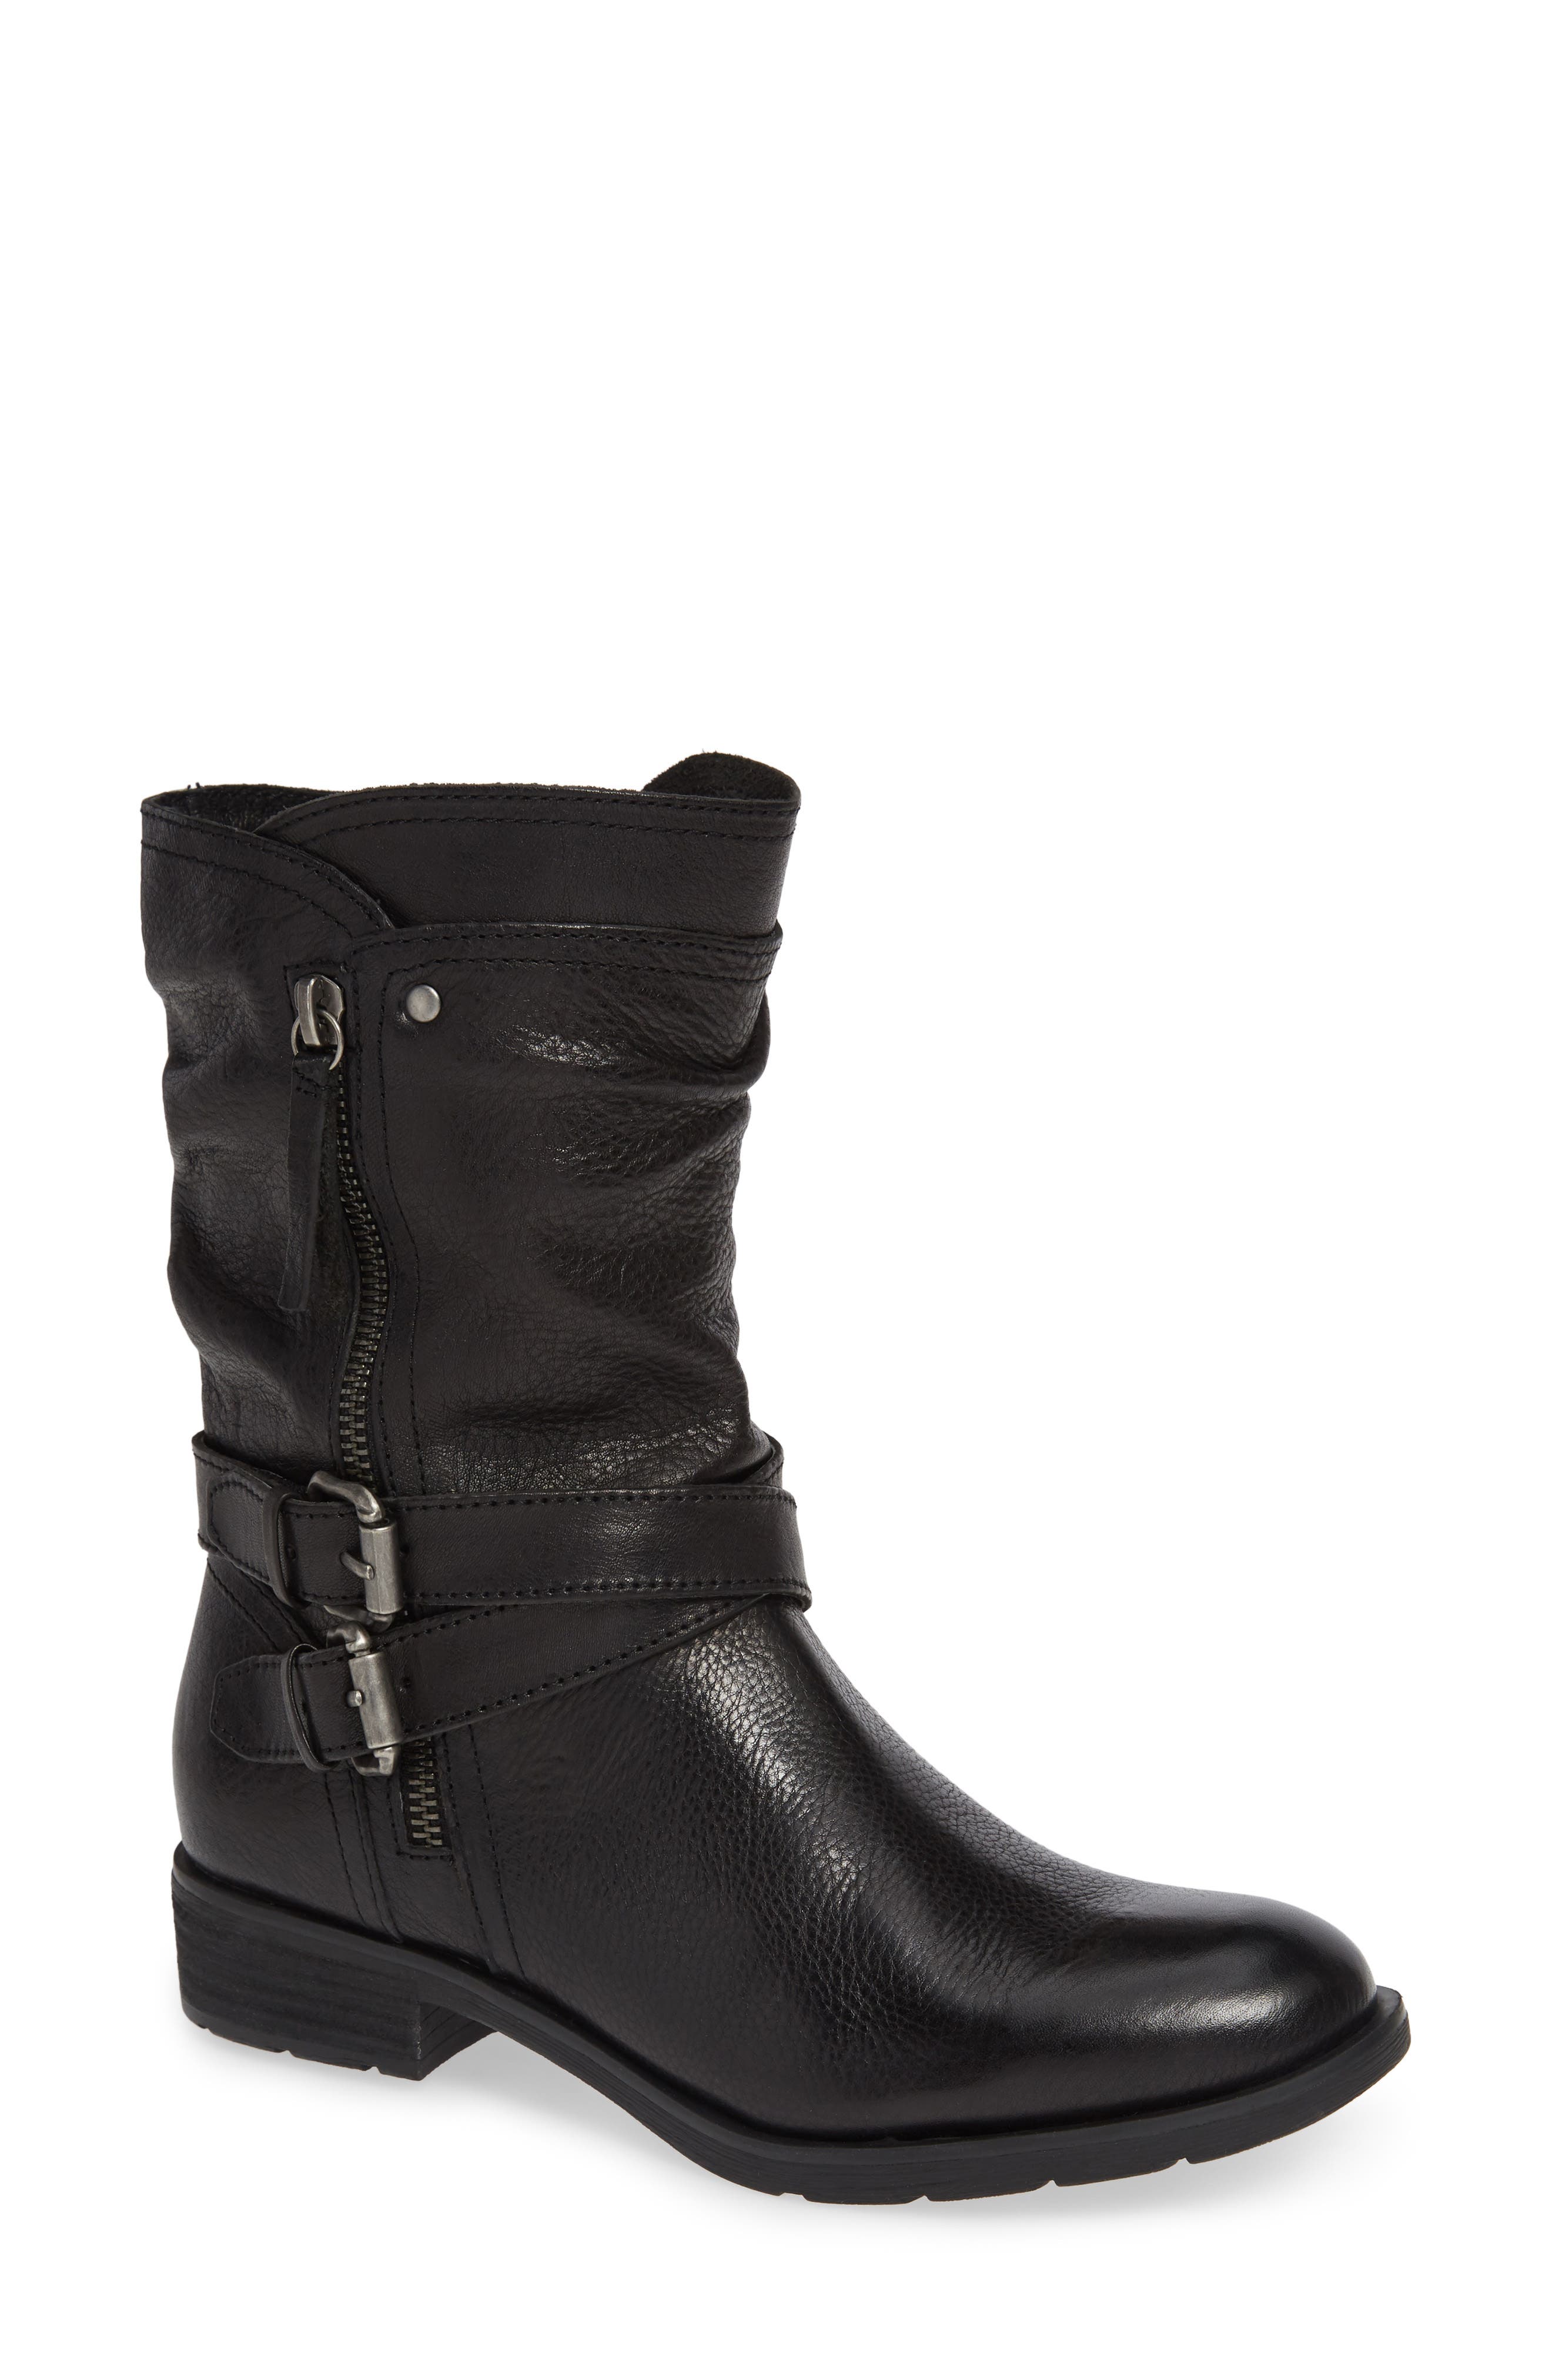 Sofft Women's Boots